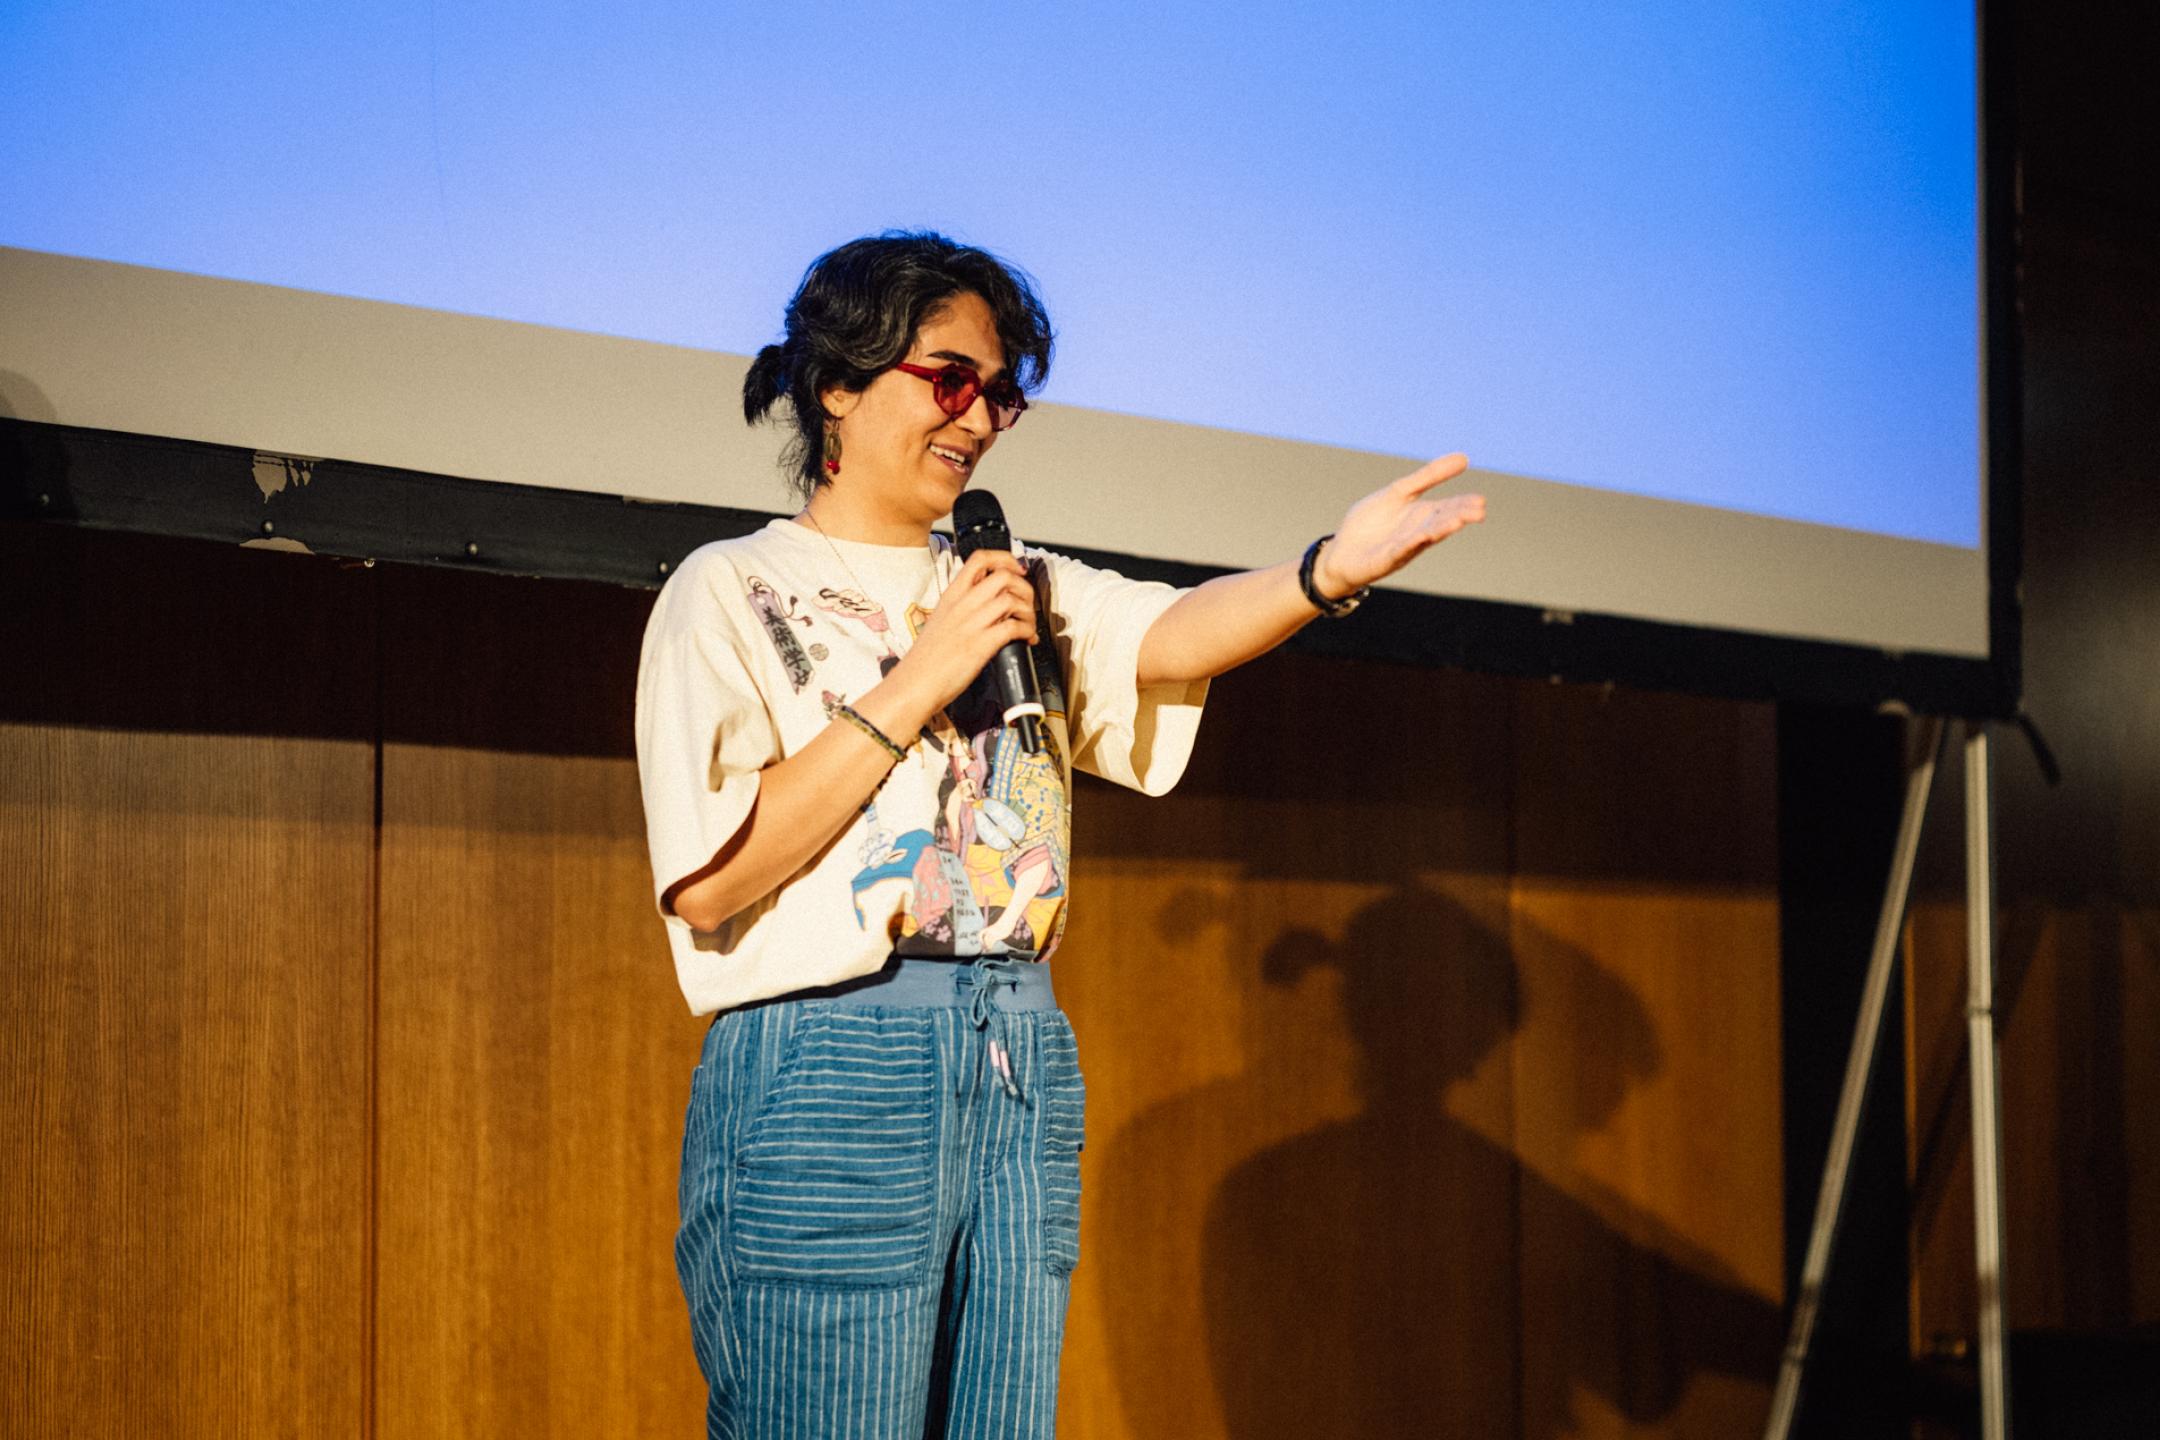 A woman speaking into a microphone is extending her hand to point to someone in the audience